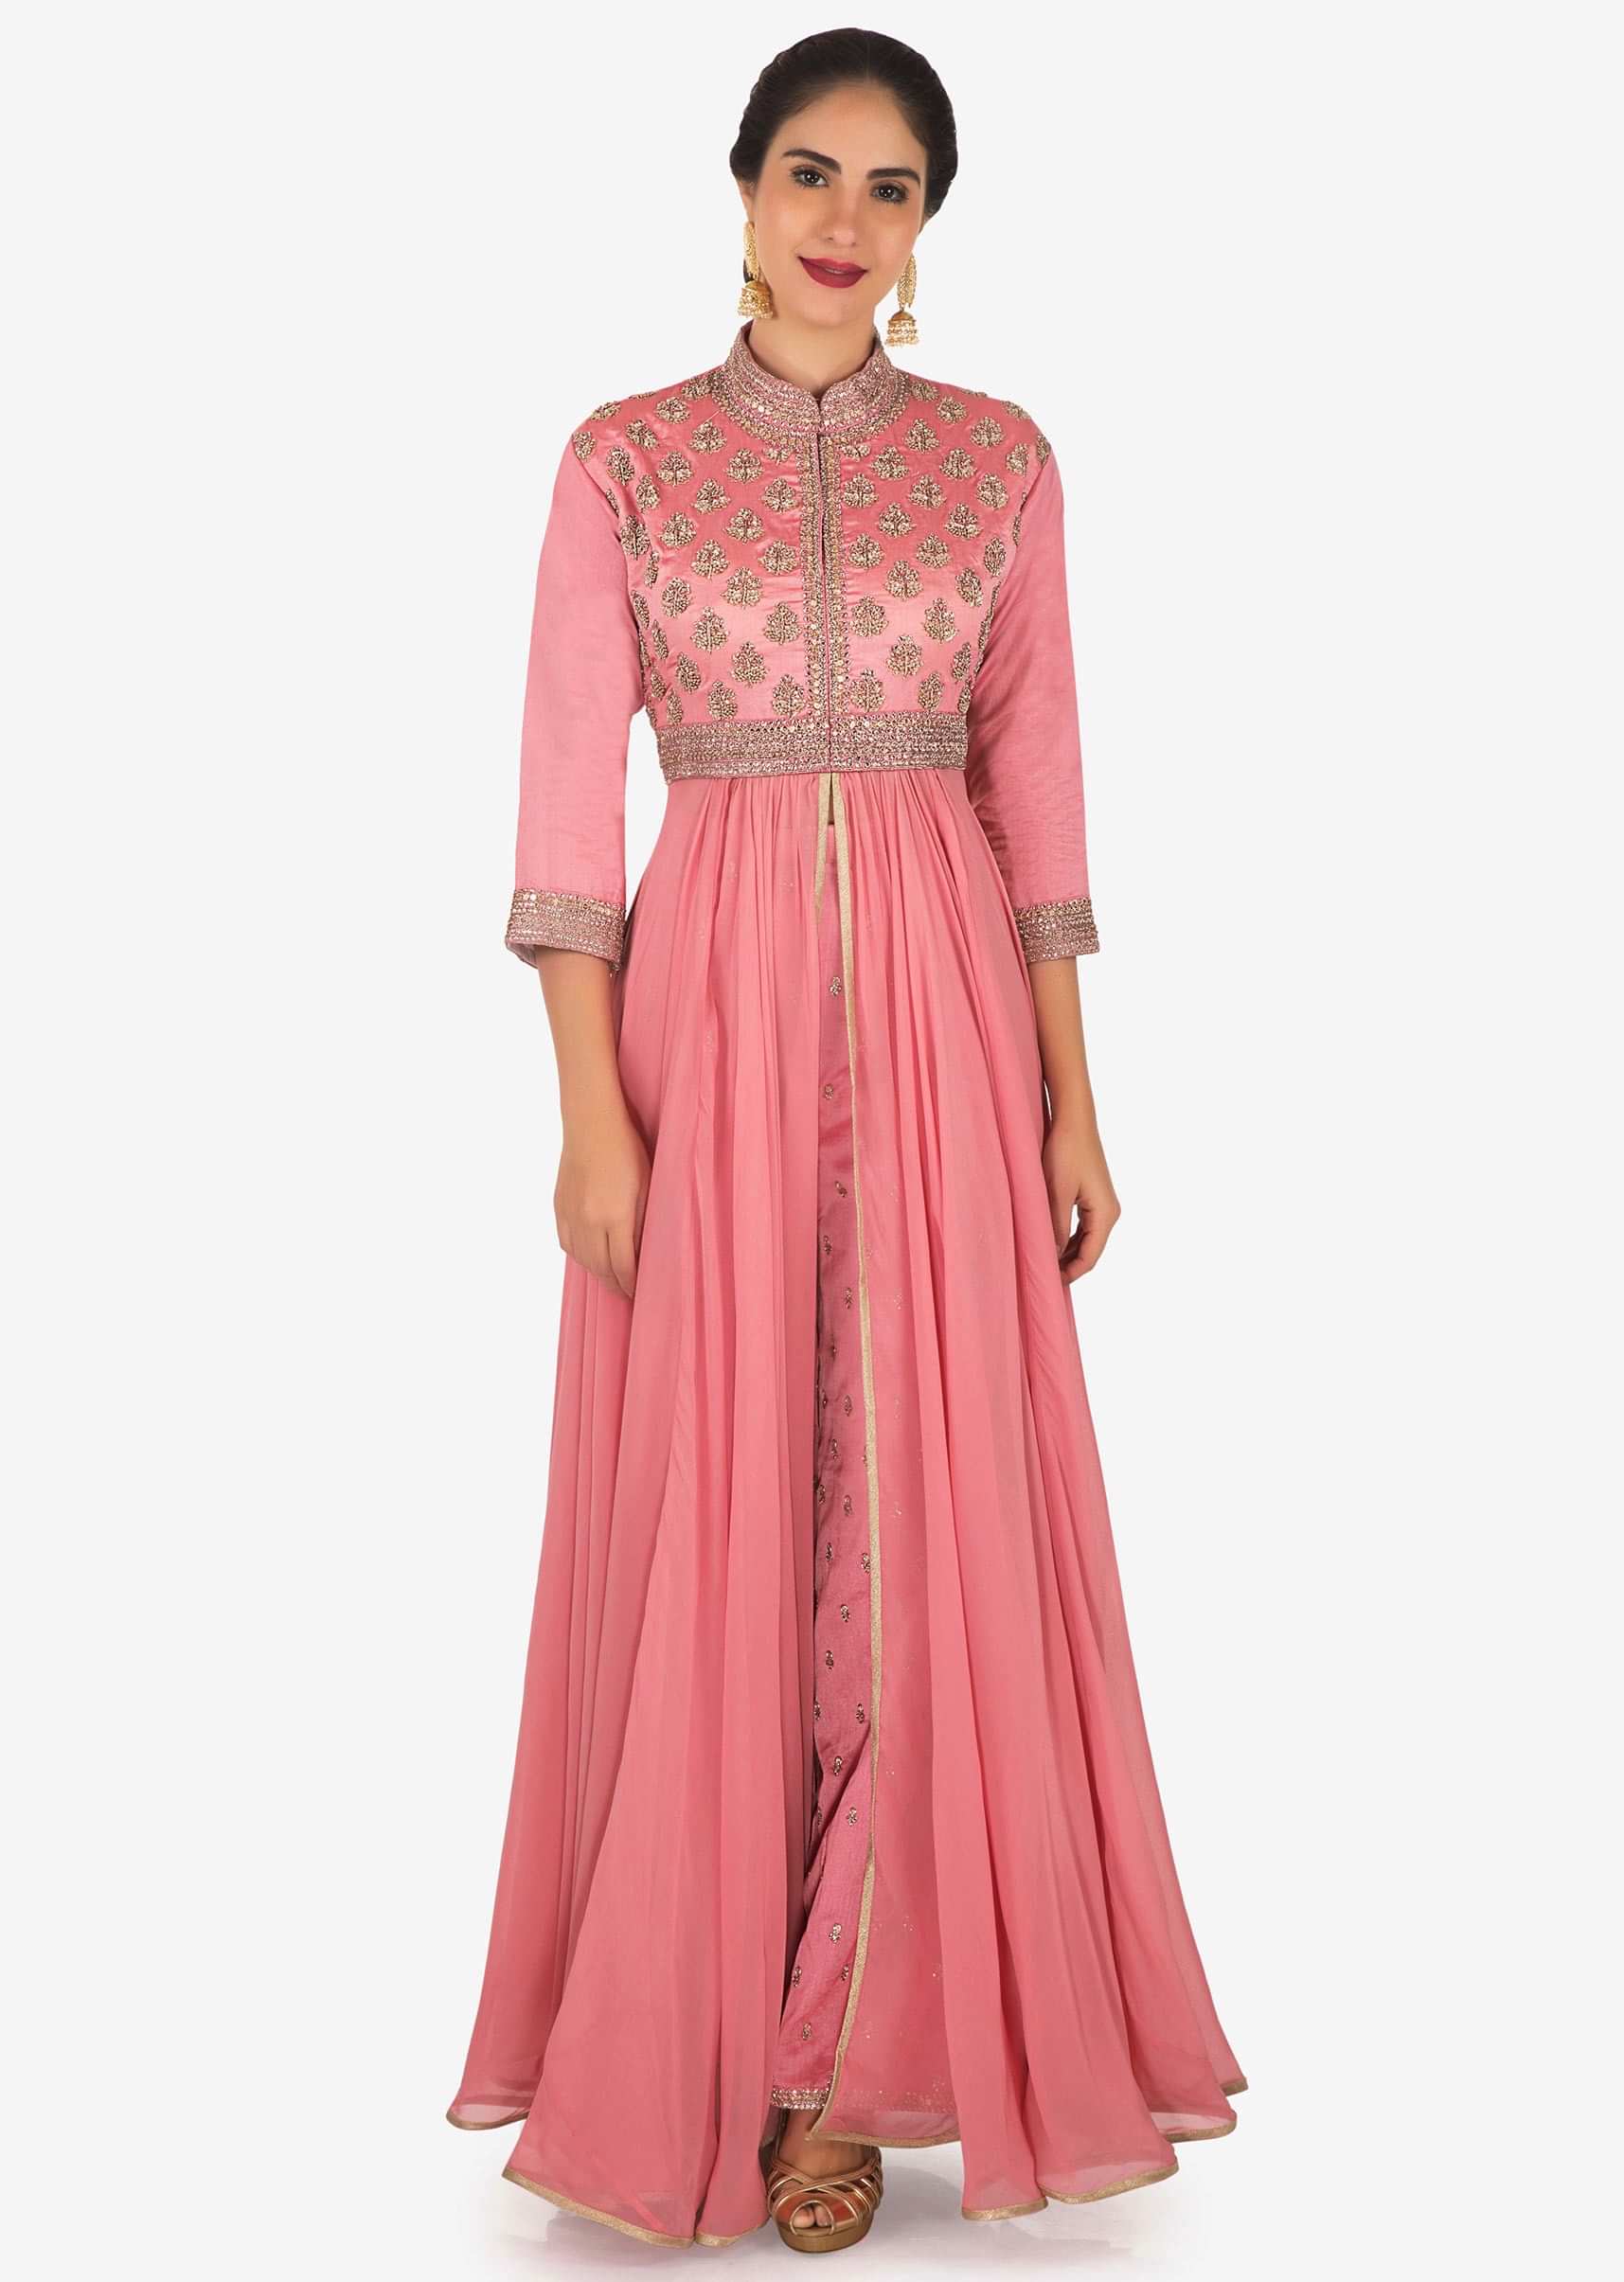 Candy pink anarkali suit in french knot embroidery